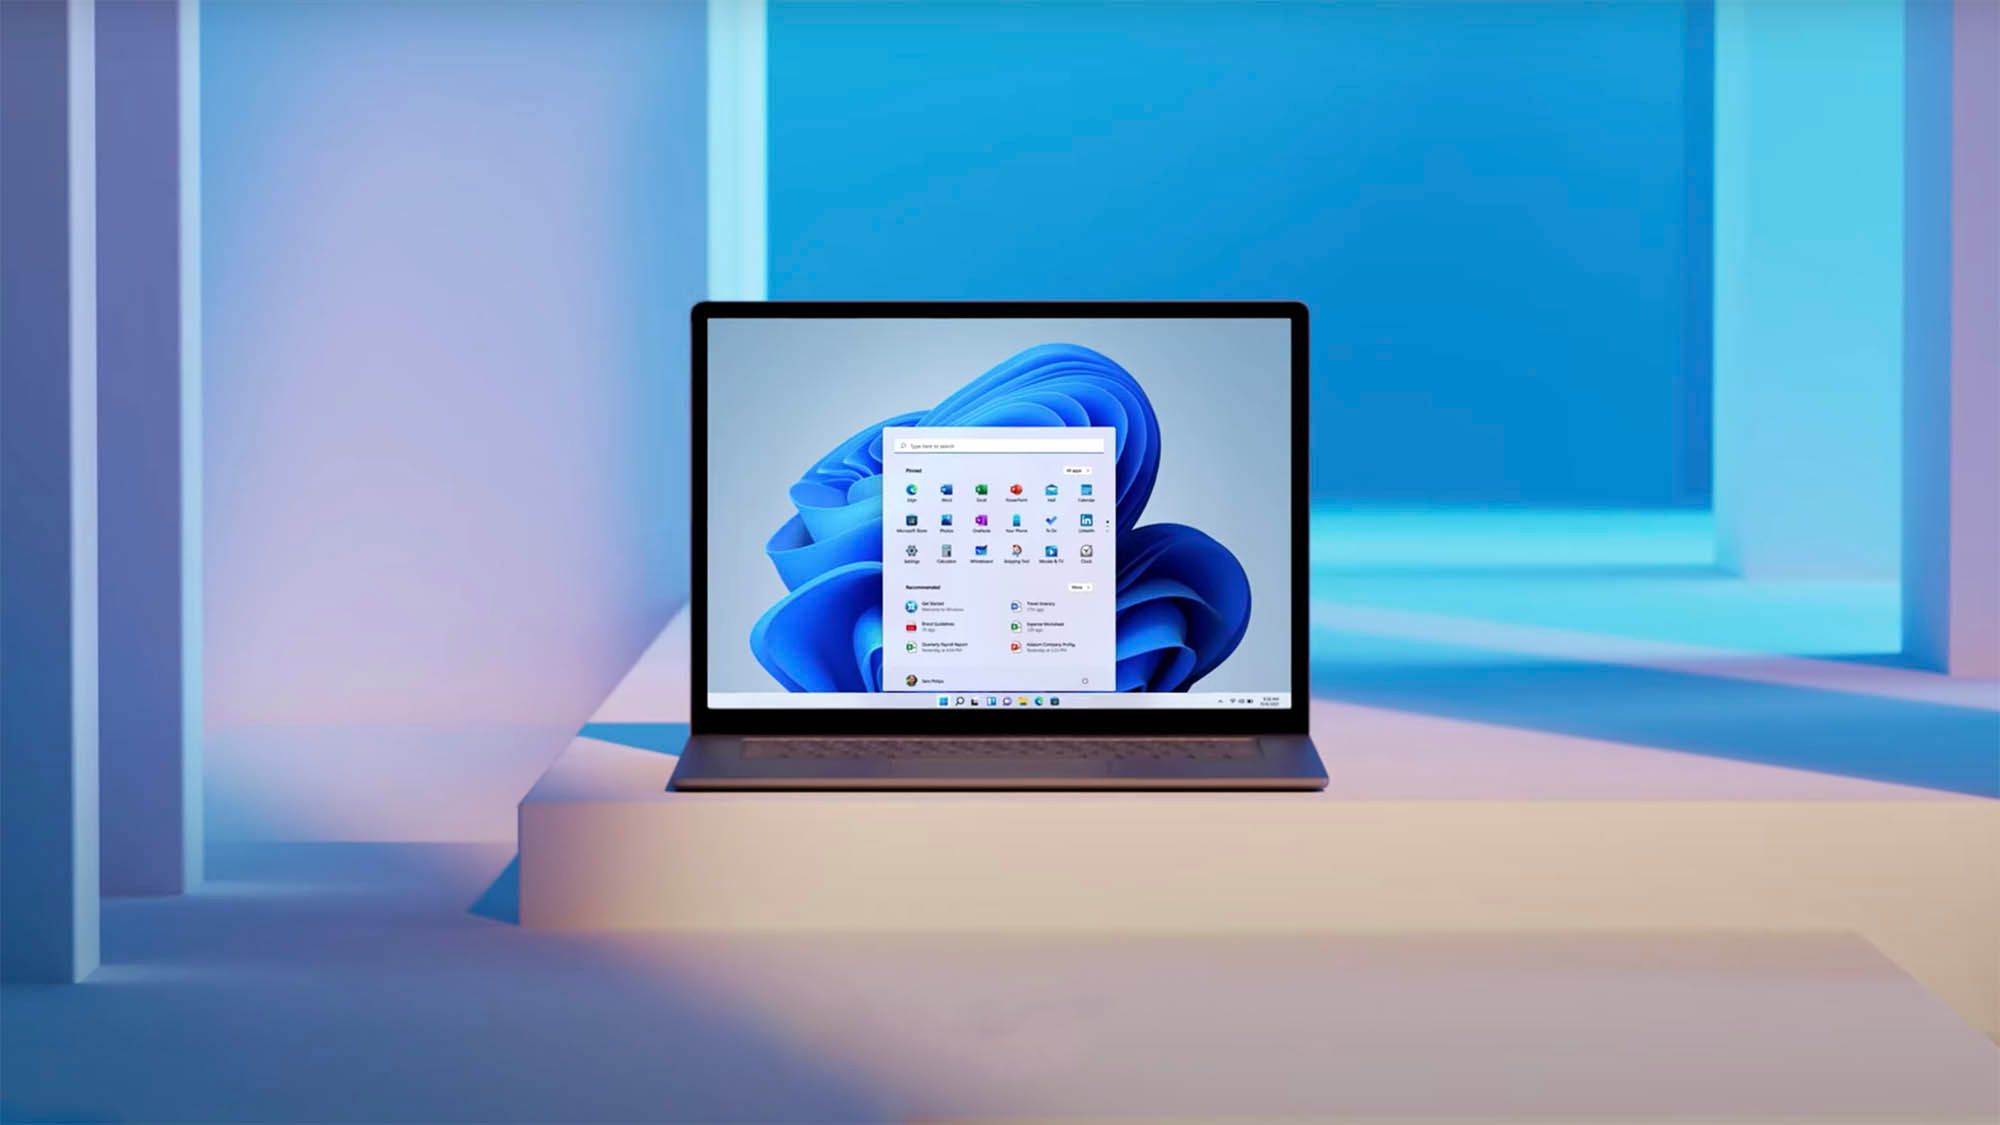 Windows 11 on a laptop in front of a colorful background.